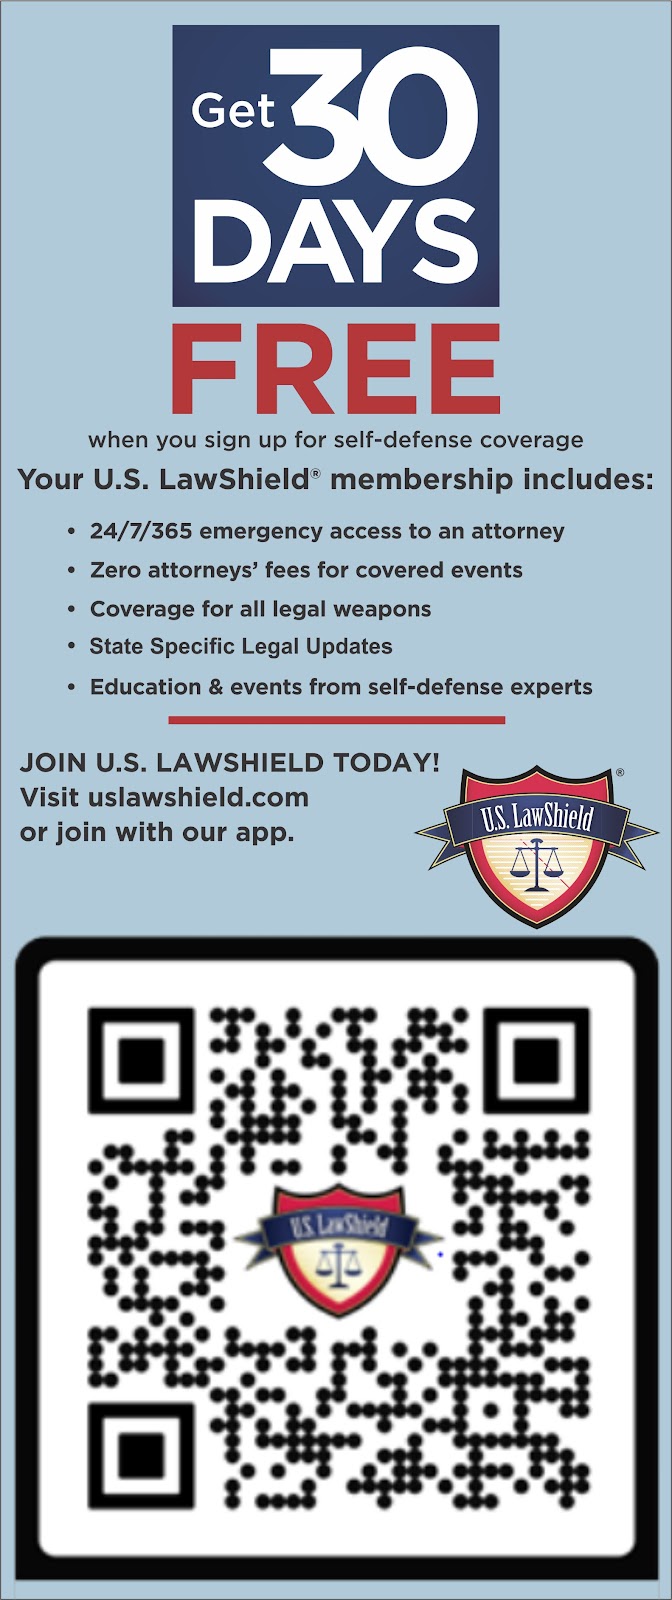 Click the Ad Below to sign up for US Law Shield